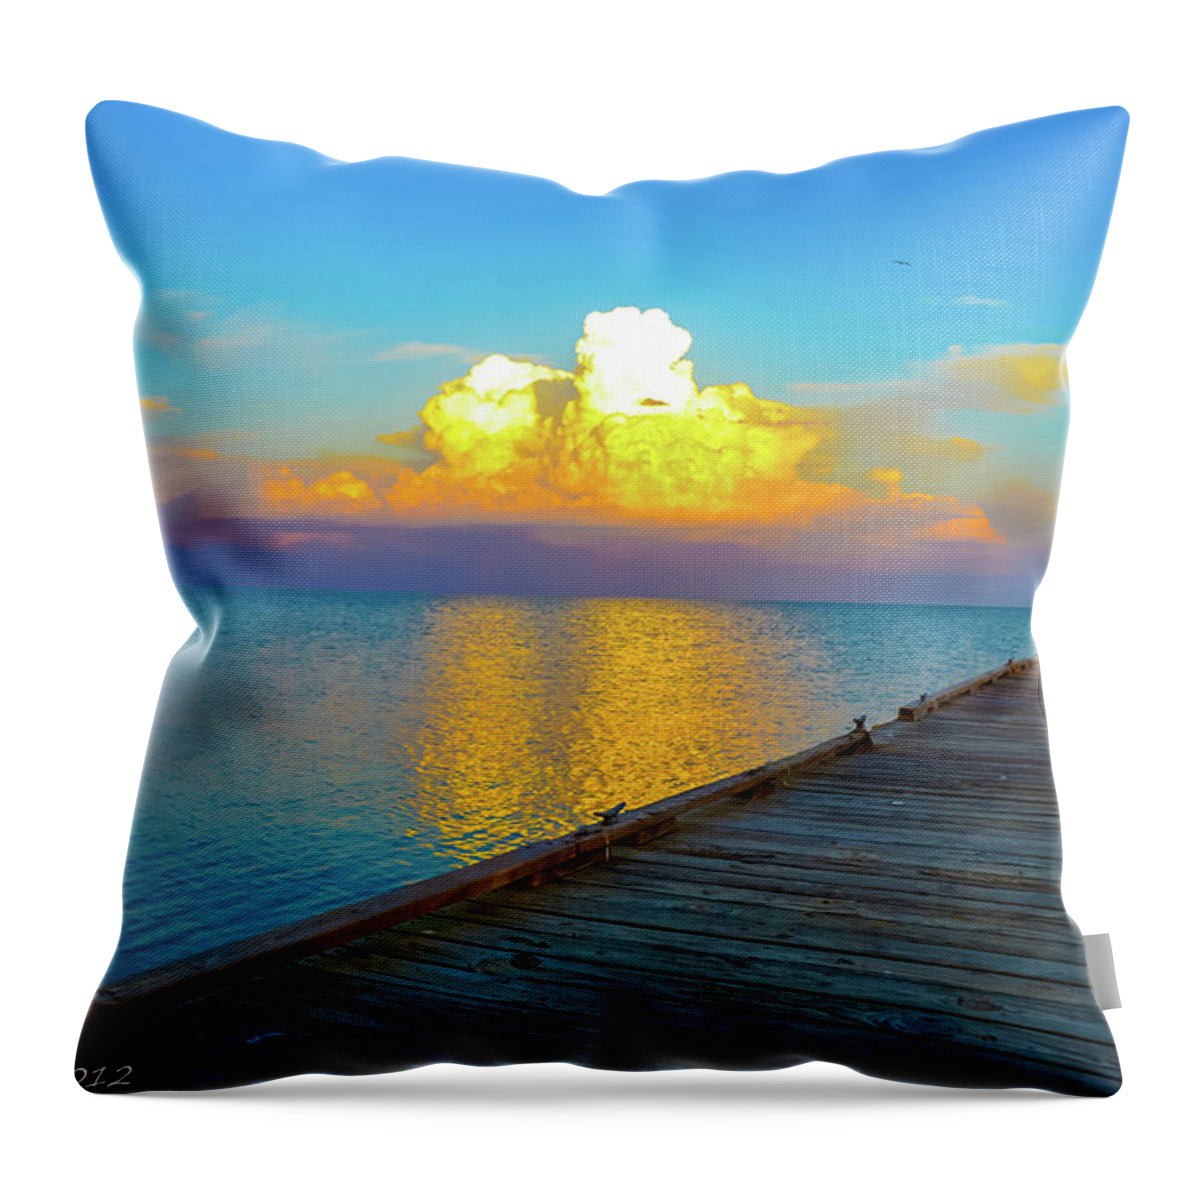 Clouds Throw Pillow featuring the photograph Gods' Painting by Shannon Harrington